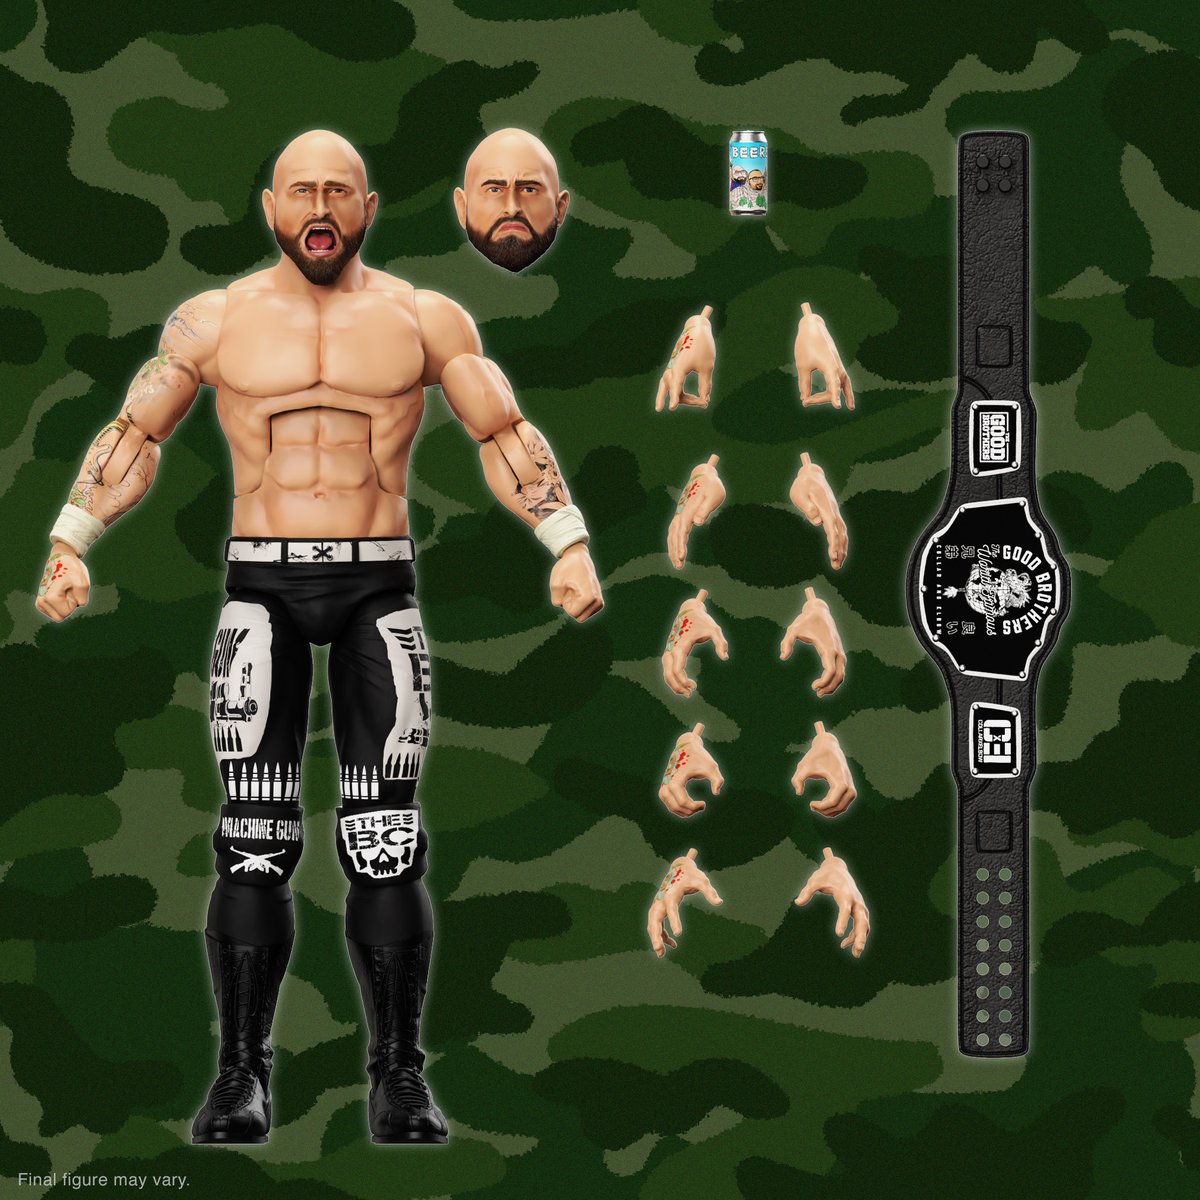 The master of the Spine Buster is no stranger to big stages and big matches! This 7” scale @machinegunka ULTIMATES! figure includes interchangeable heads and hands, a beer can, and a Good Brothers title belt. Pre-order the new Good Brothers ULTIMATES! on Super7.com!